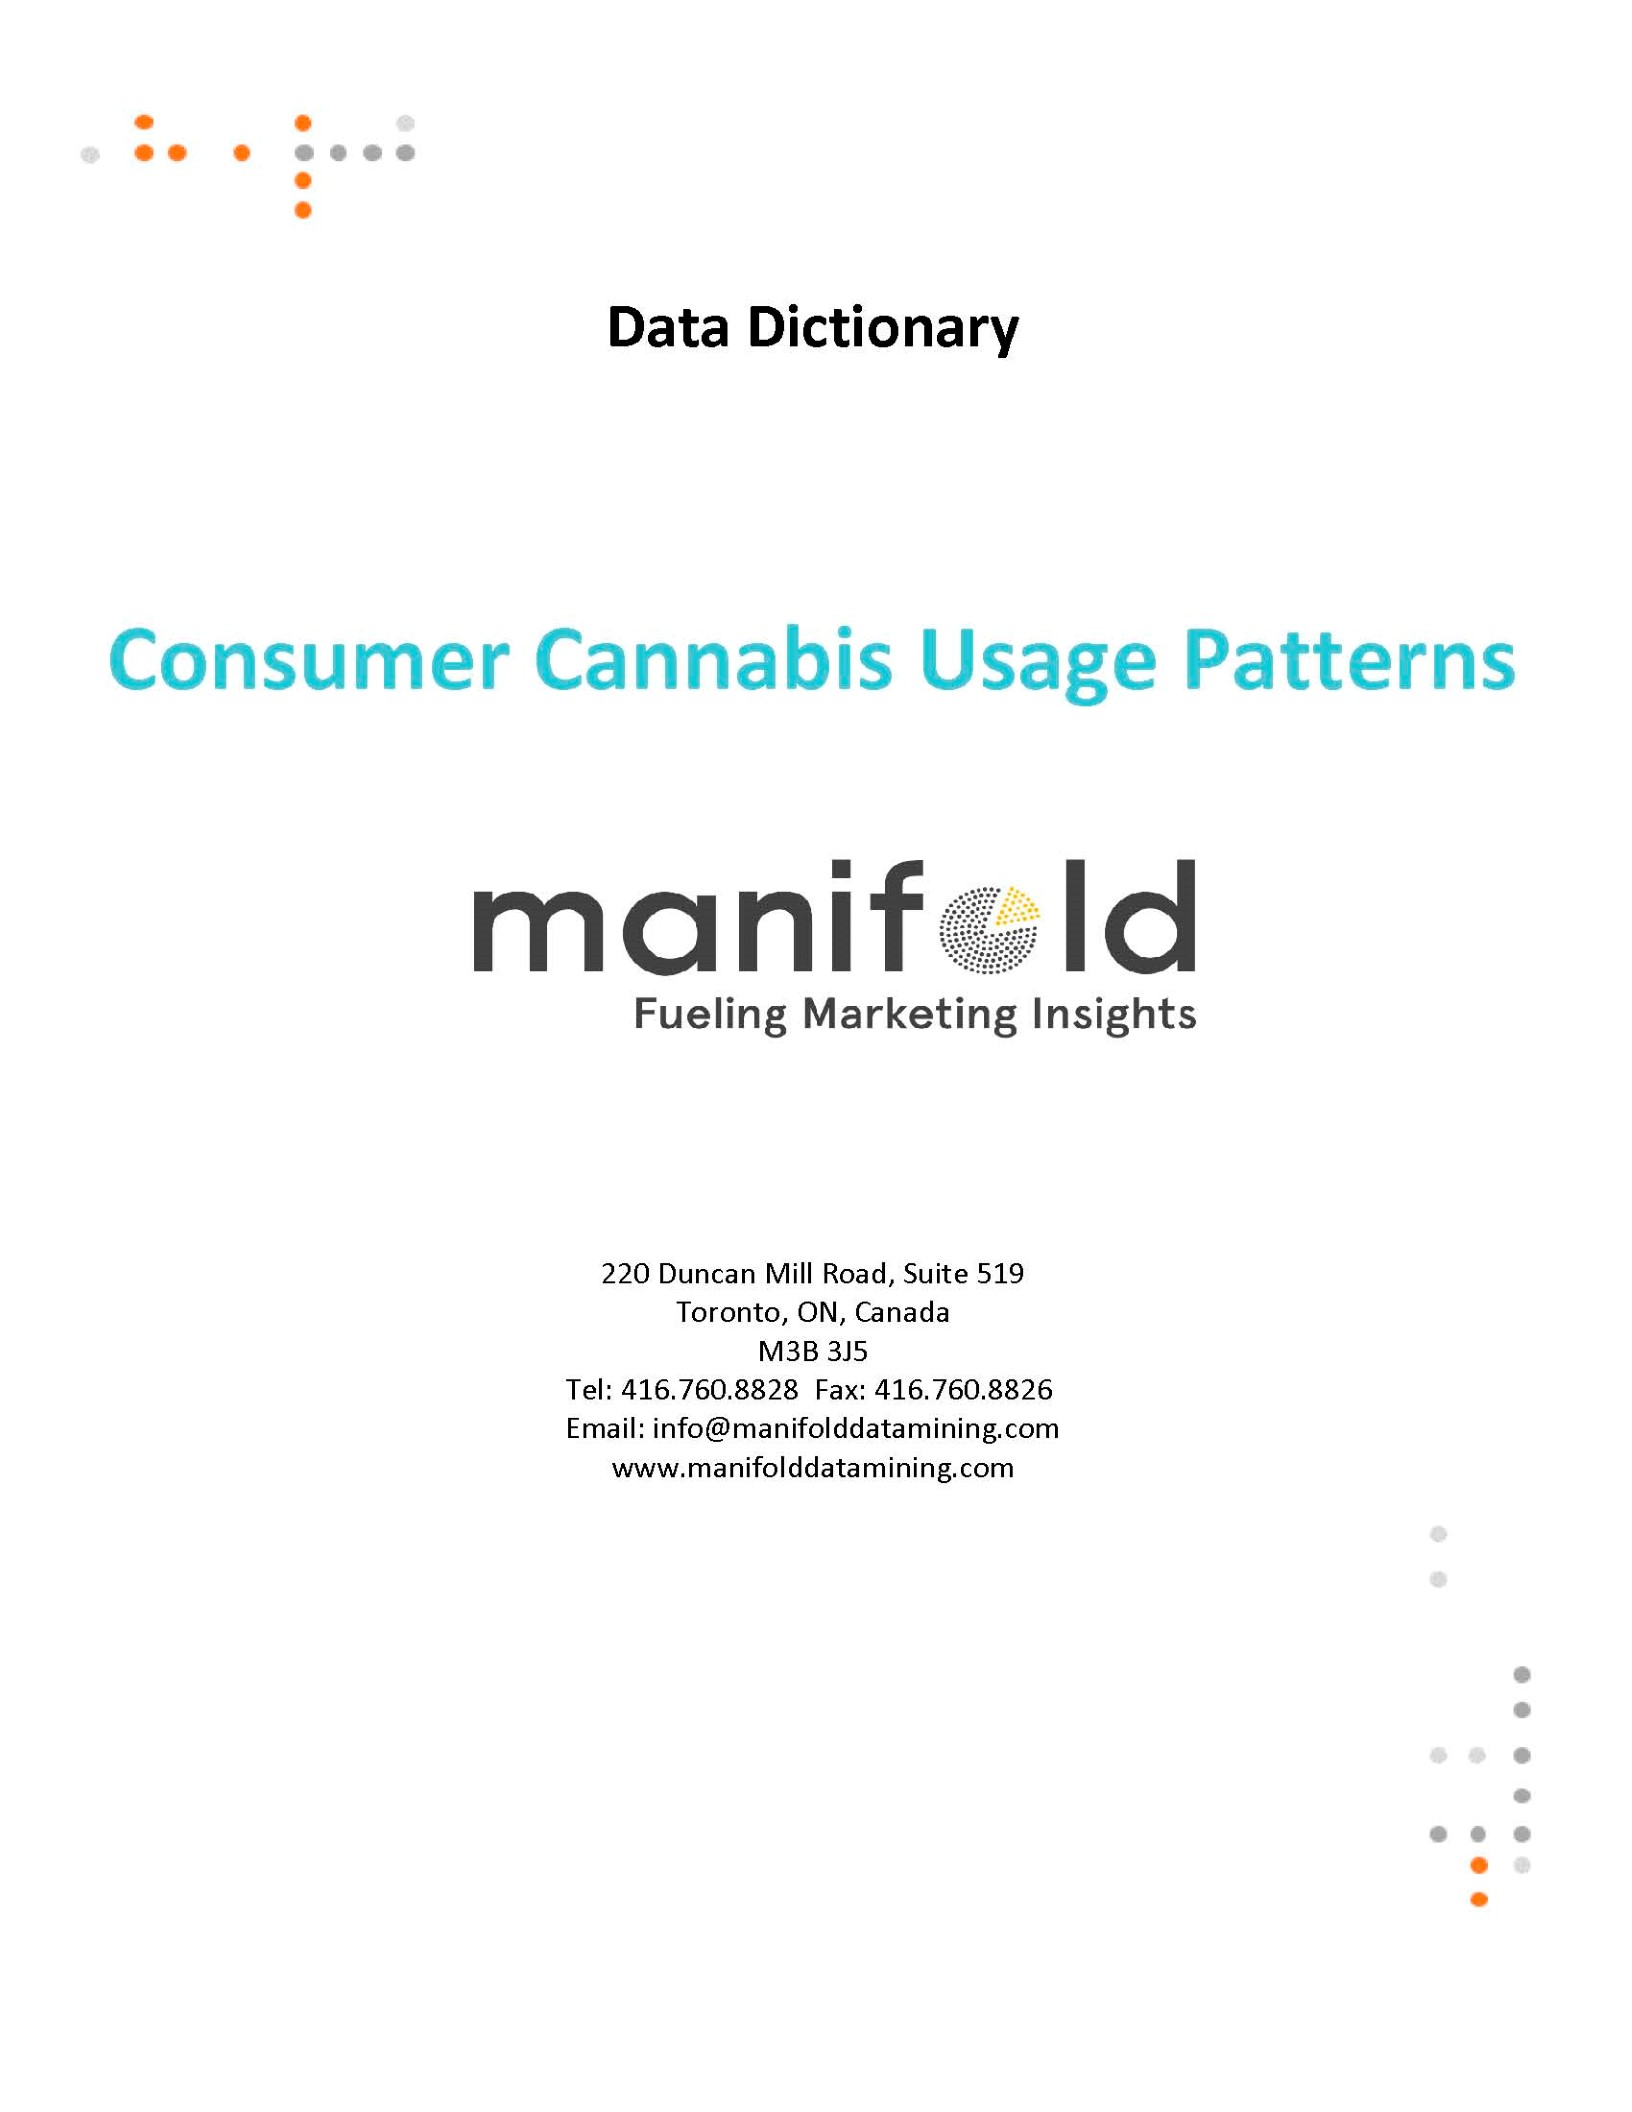 Data Dictionary Cannabis Usage Patterns_Page_01